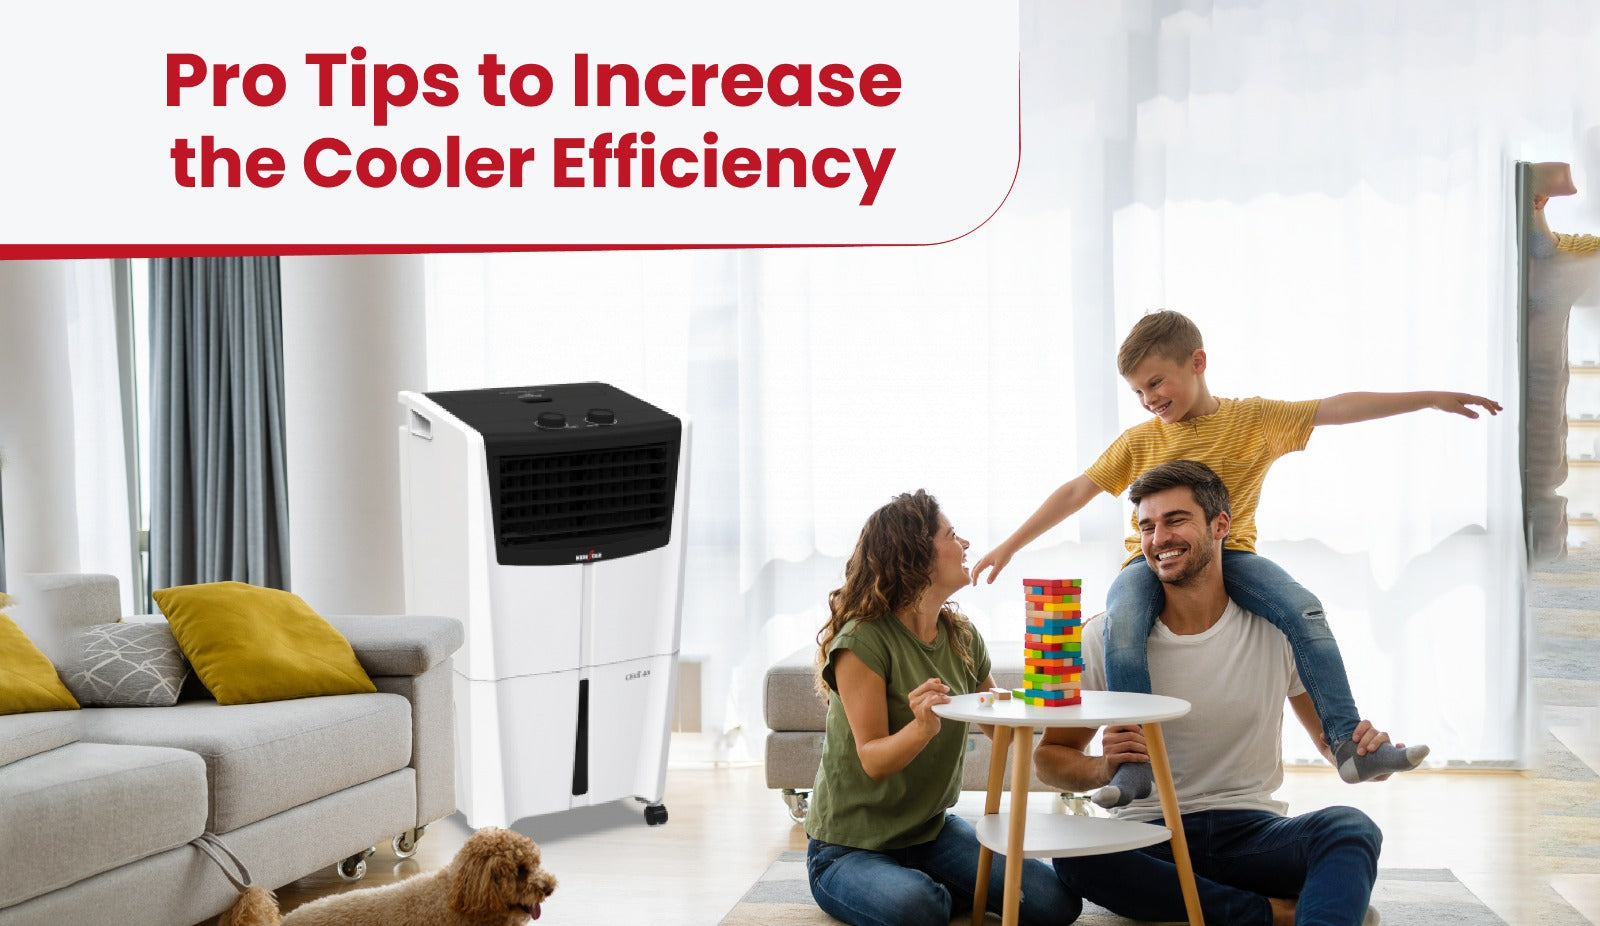 PRO TIPS TO INCREASE COOLER EFFICIENCY